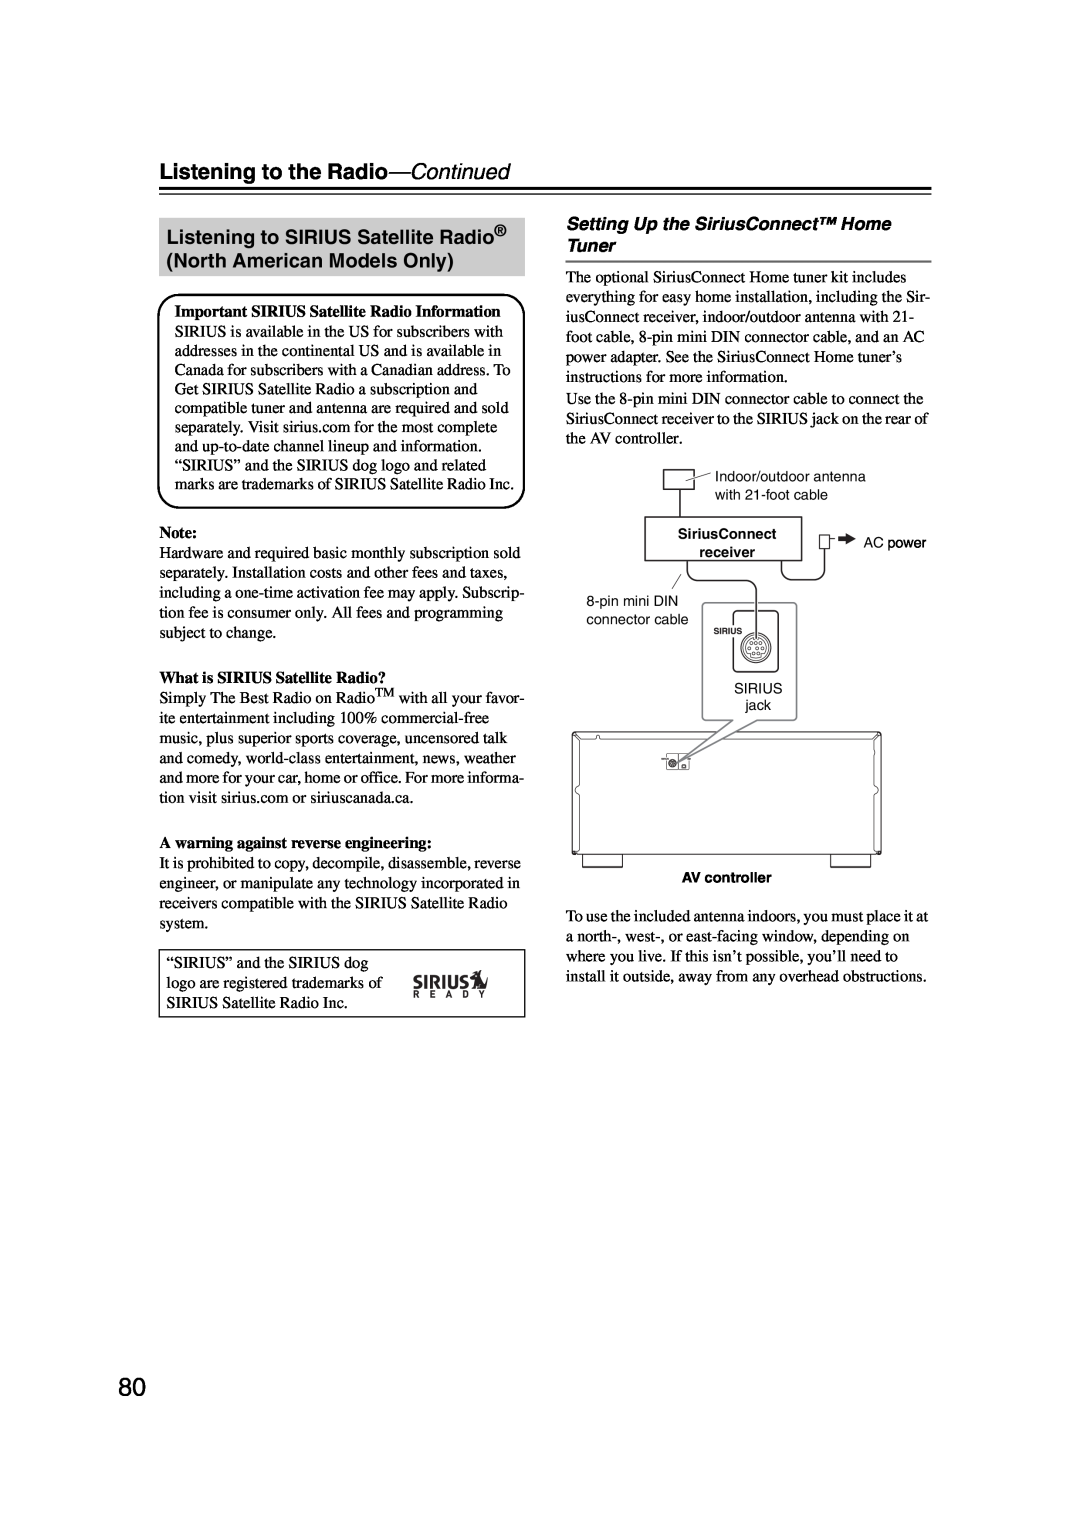 Integra DHC-9.9 instruction manual Setting Up the SiriusConnect Home Tuner, Important SIRIUS Satellite Radio Information 